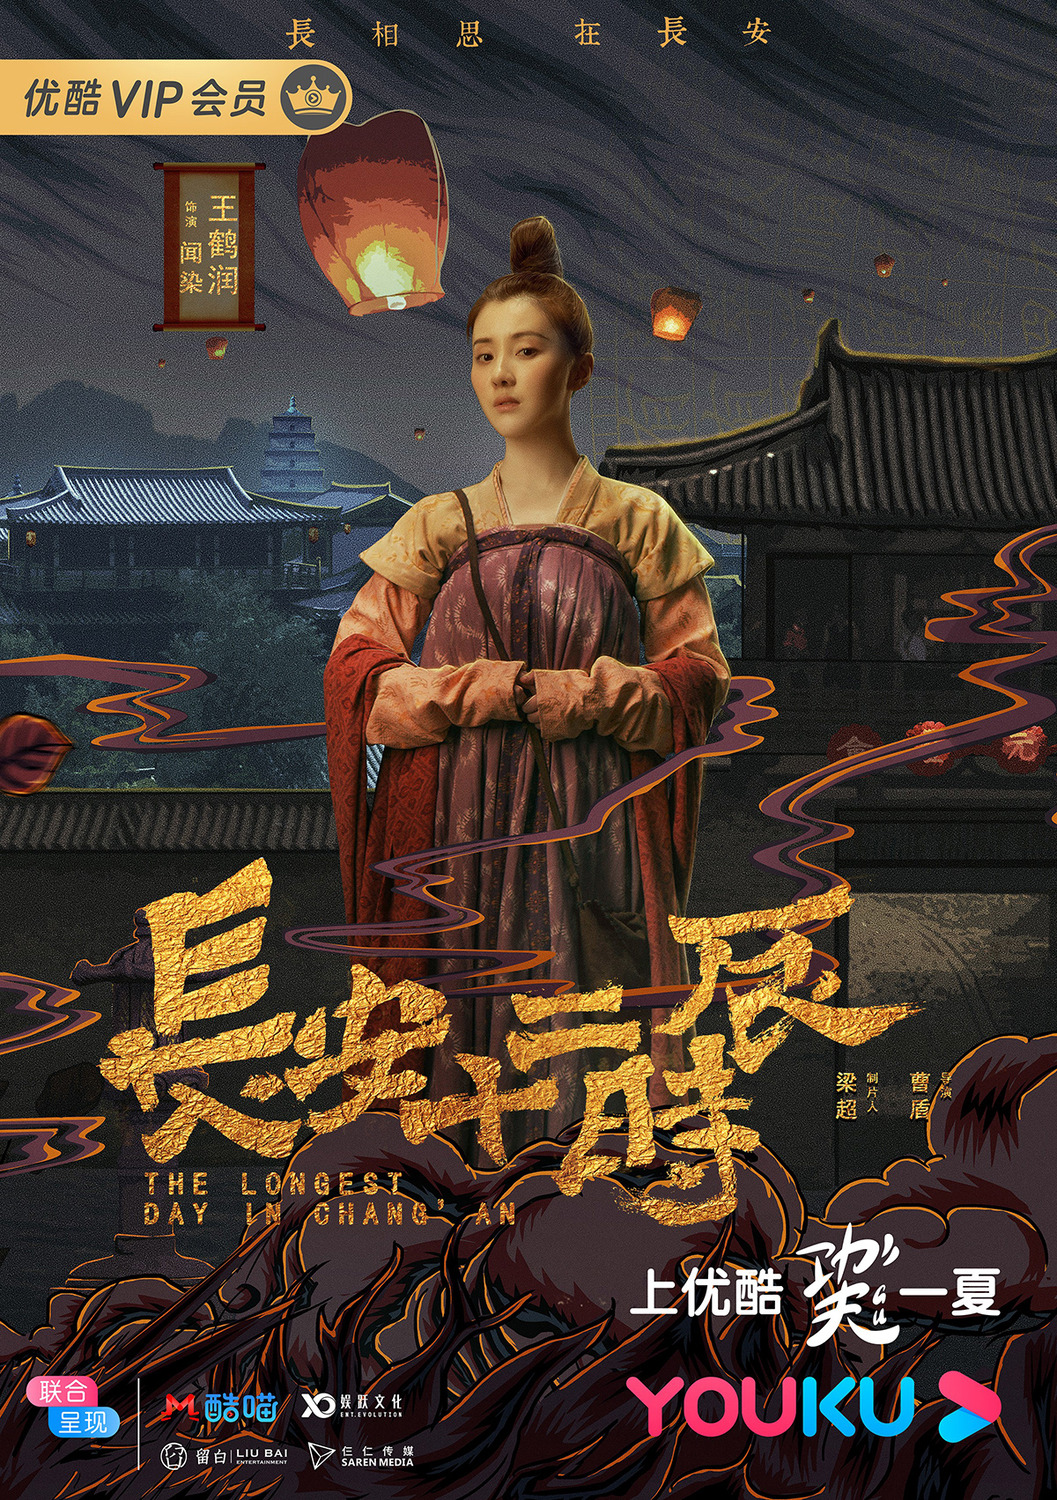 Extra Large TV Poster Image for Chang'an shi er shi chen (#5 of 18)